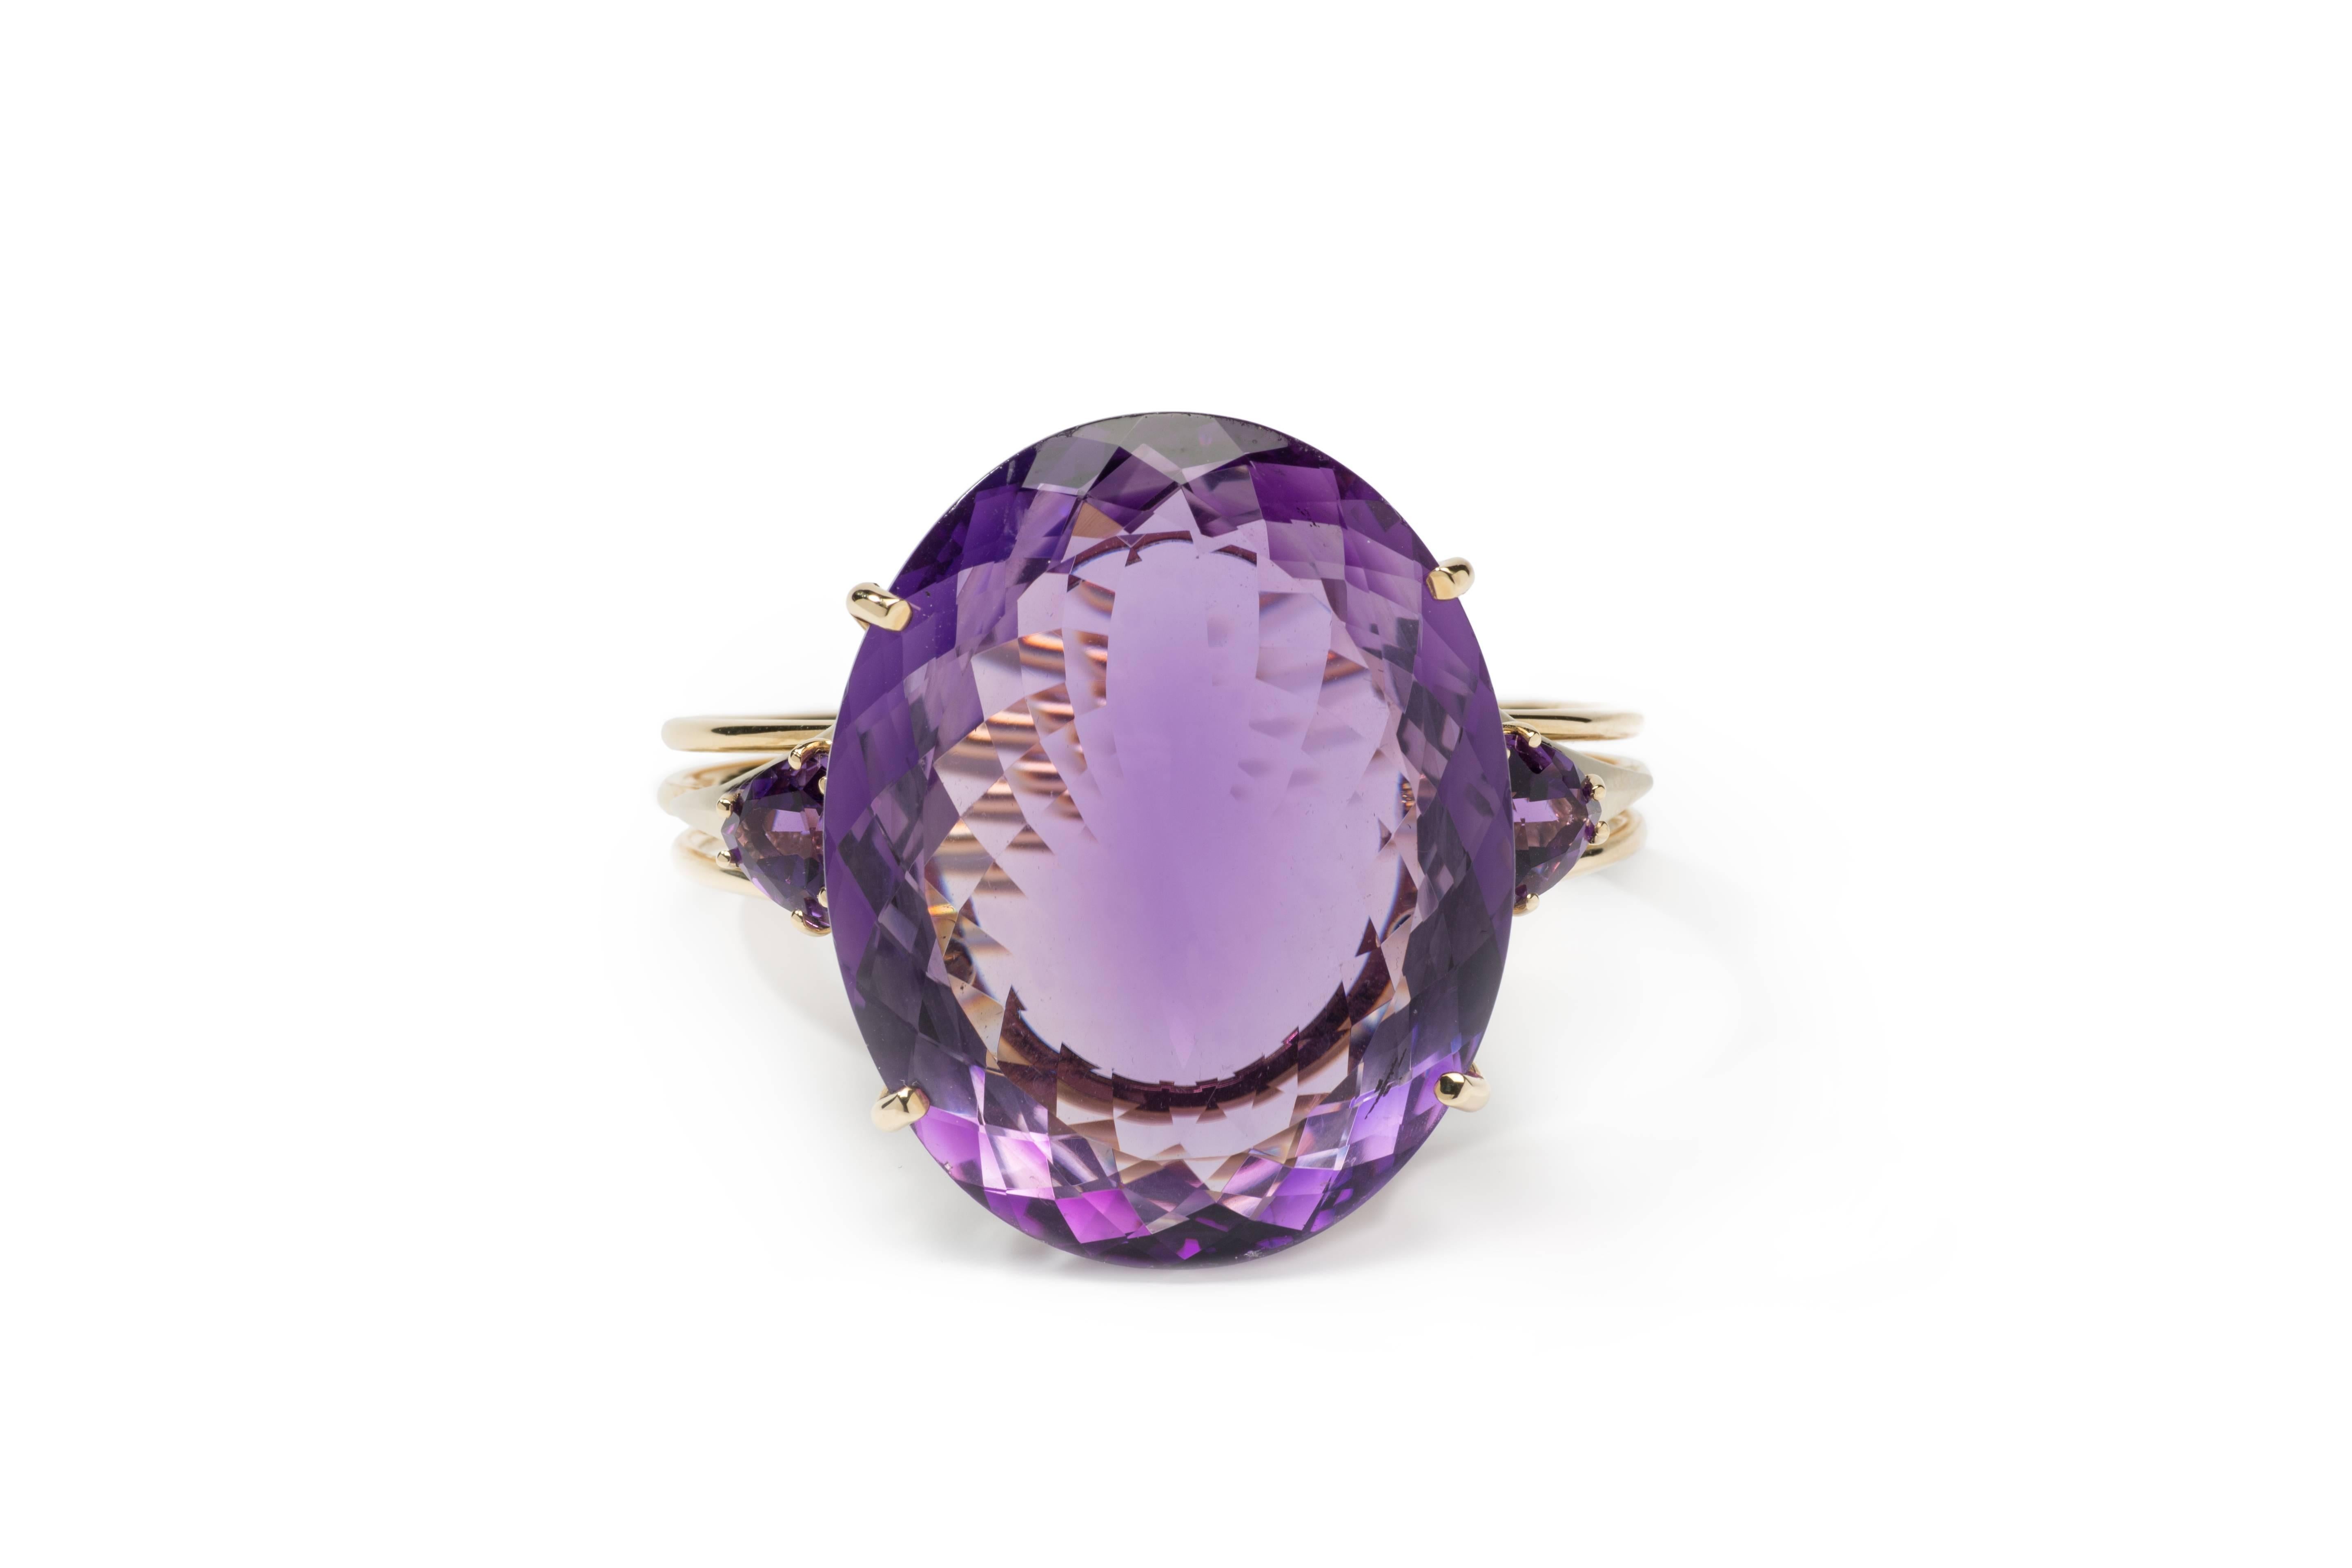 Attractive design with magnificent amethyst 1.95 x 1.57 x 0.68 in ( 49,6 x 39,8 x 17,2 mm ). 
On both sides 2 triangle-shape amethysts. Made in 18K yellow gold. Total weight 76,1 g. 1.85 x  2.24 in ( 4,7 x 5,7 cm )